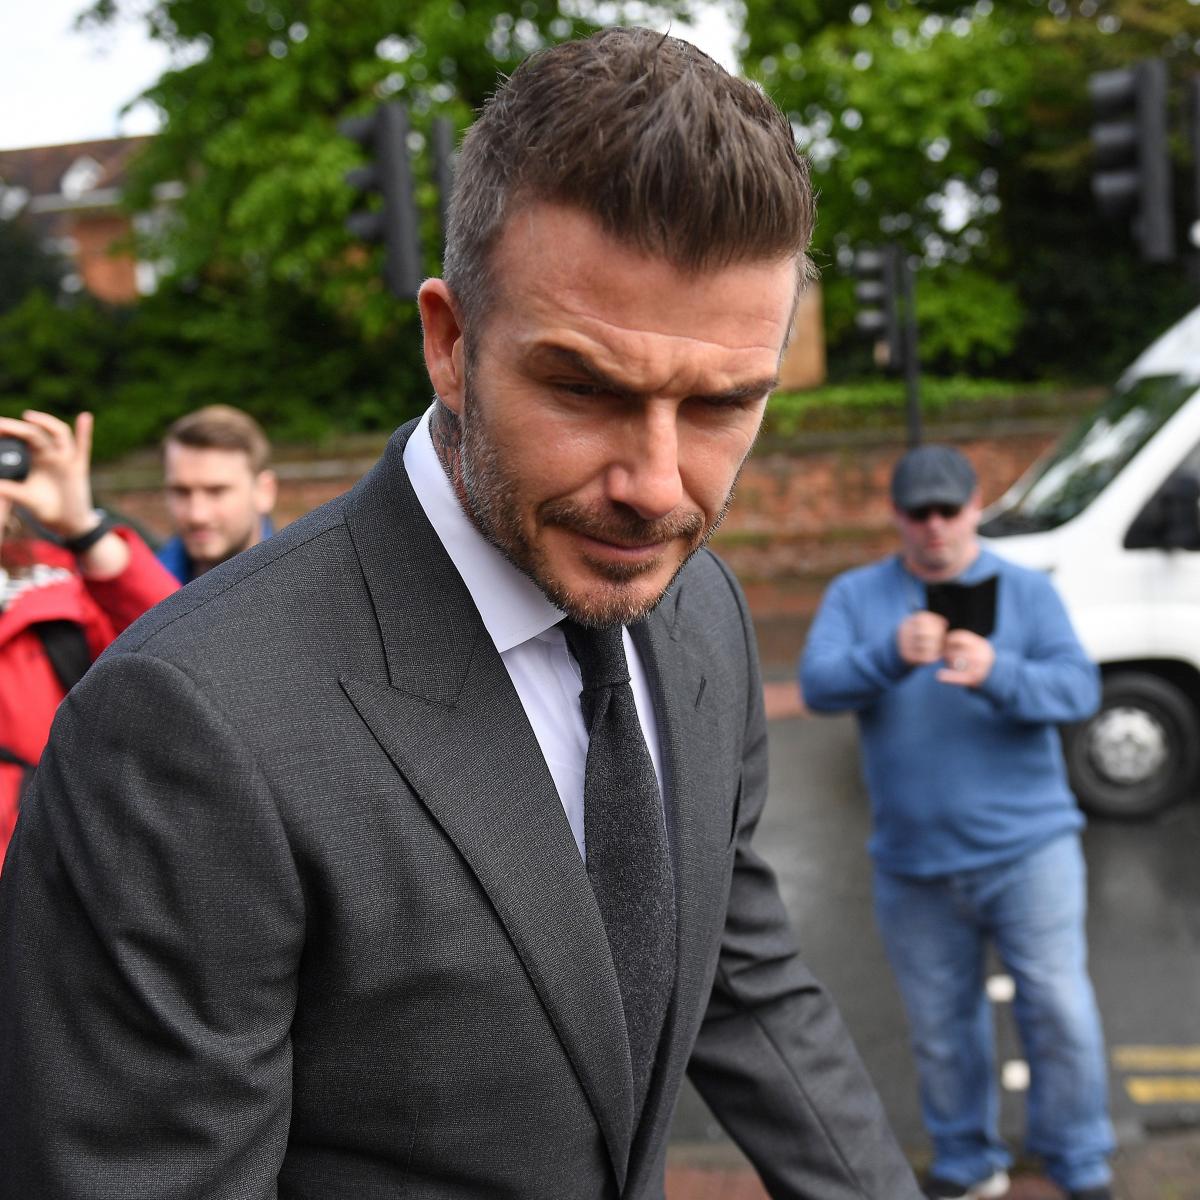 David Beckham Receives 6-Month Ban for Using Cell Phone While Driving ...